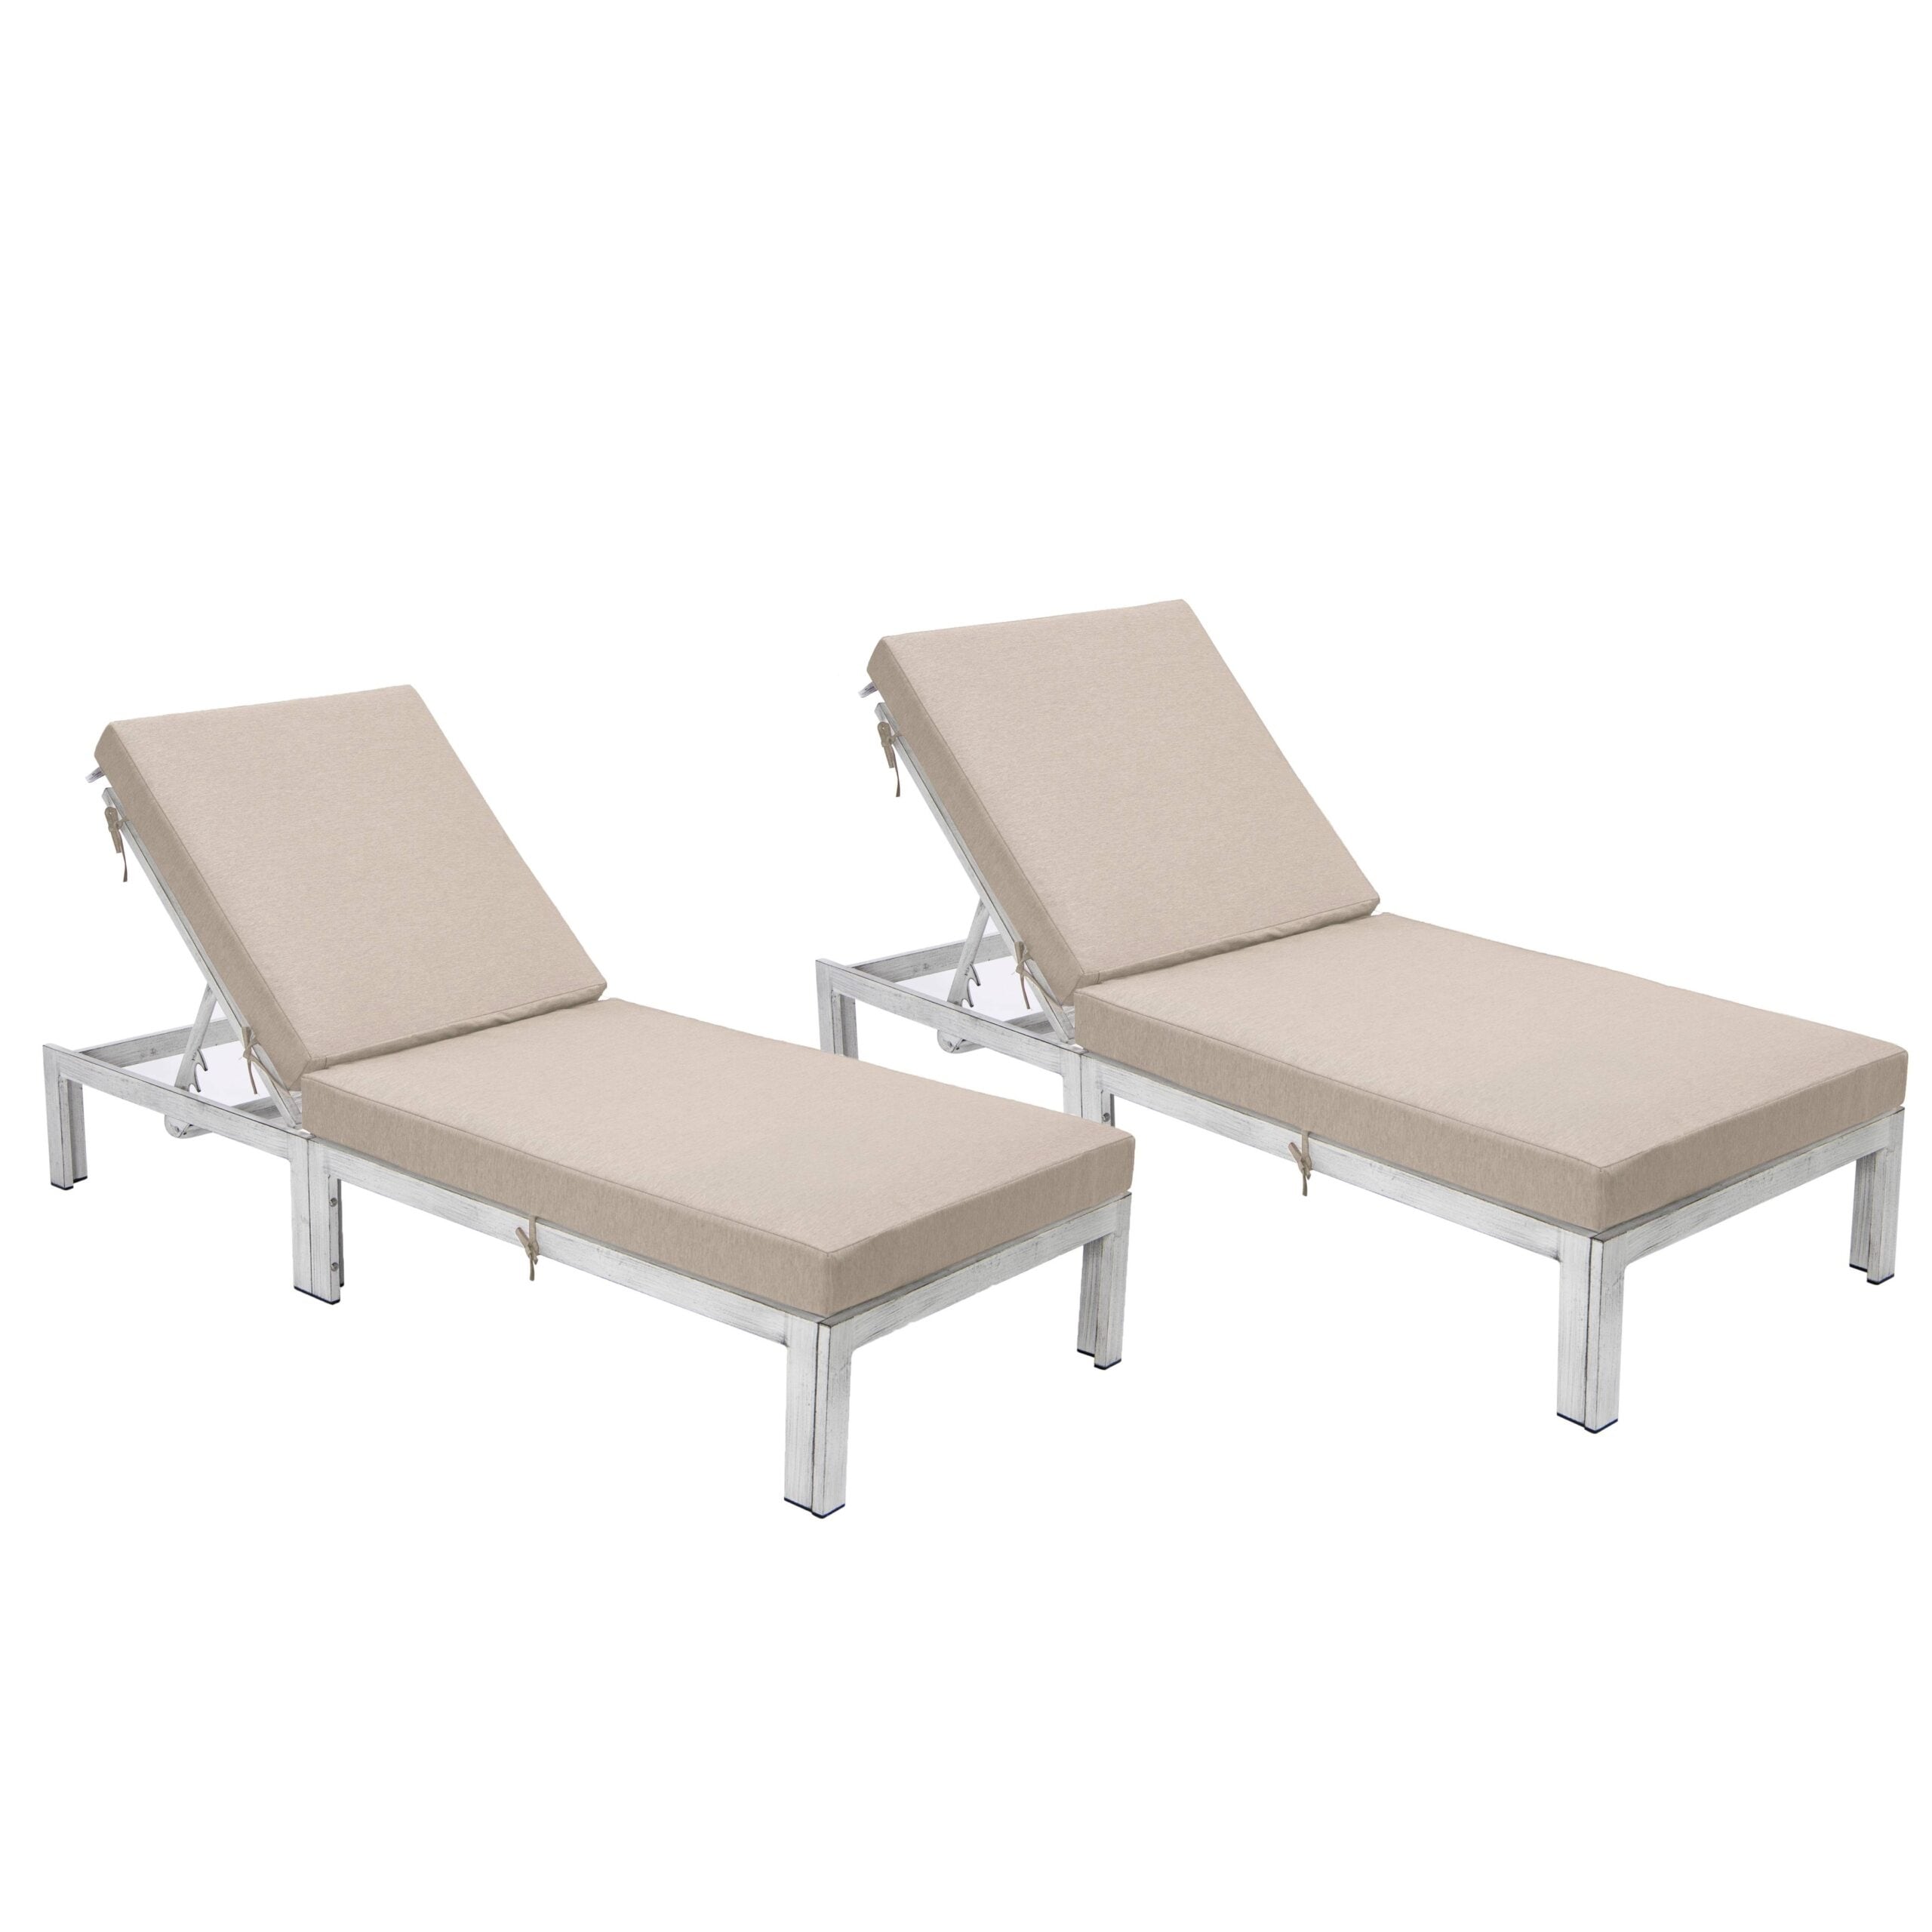 Leisuremod Chelsea Grey Chaise Lounge Chair With Cushions Set Of 2